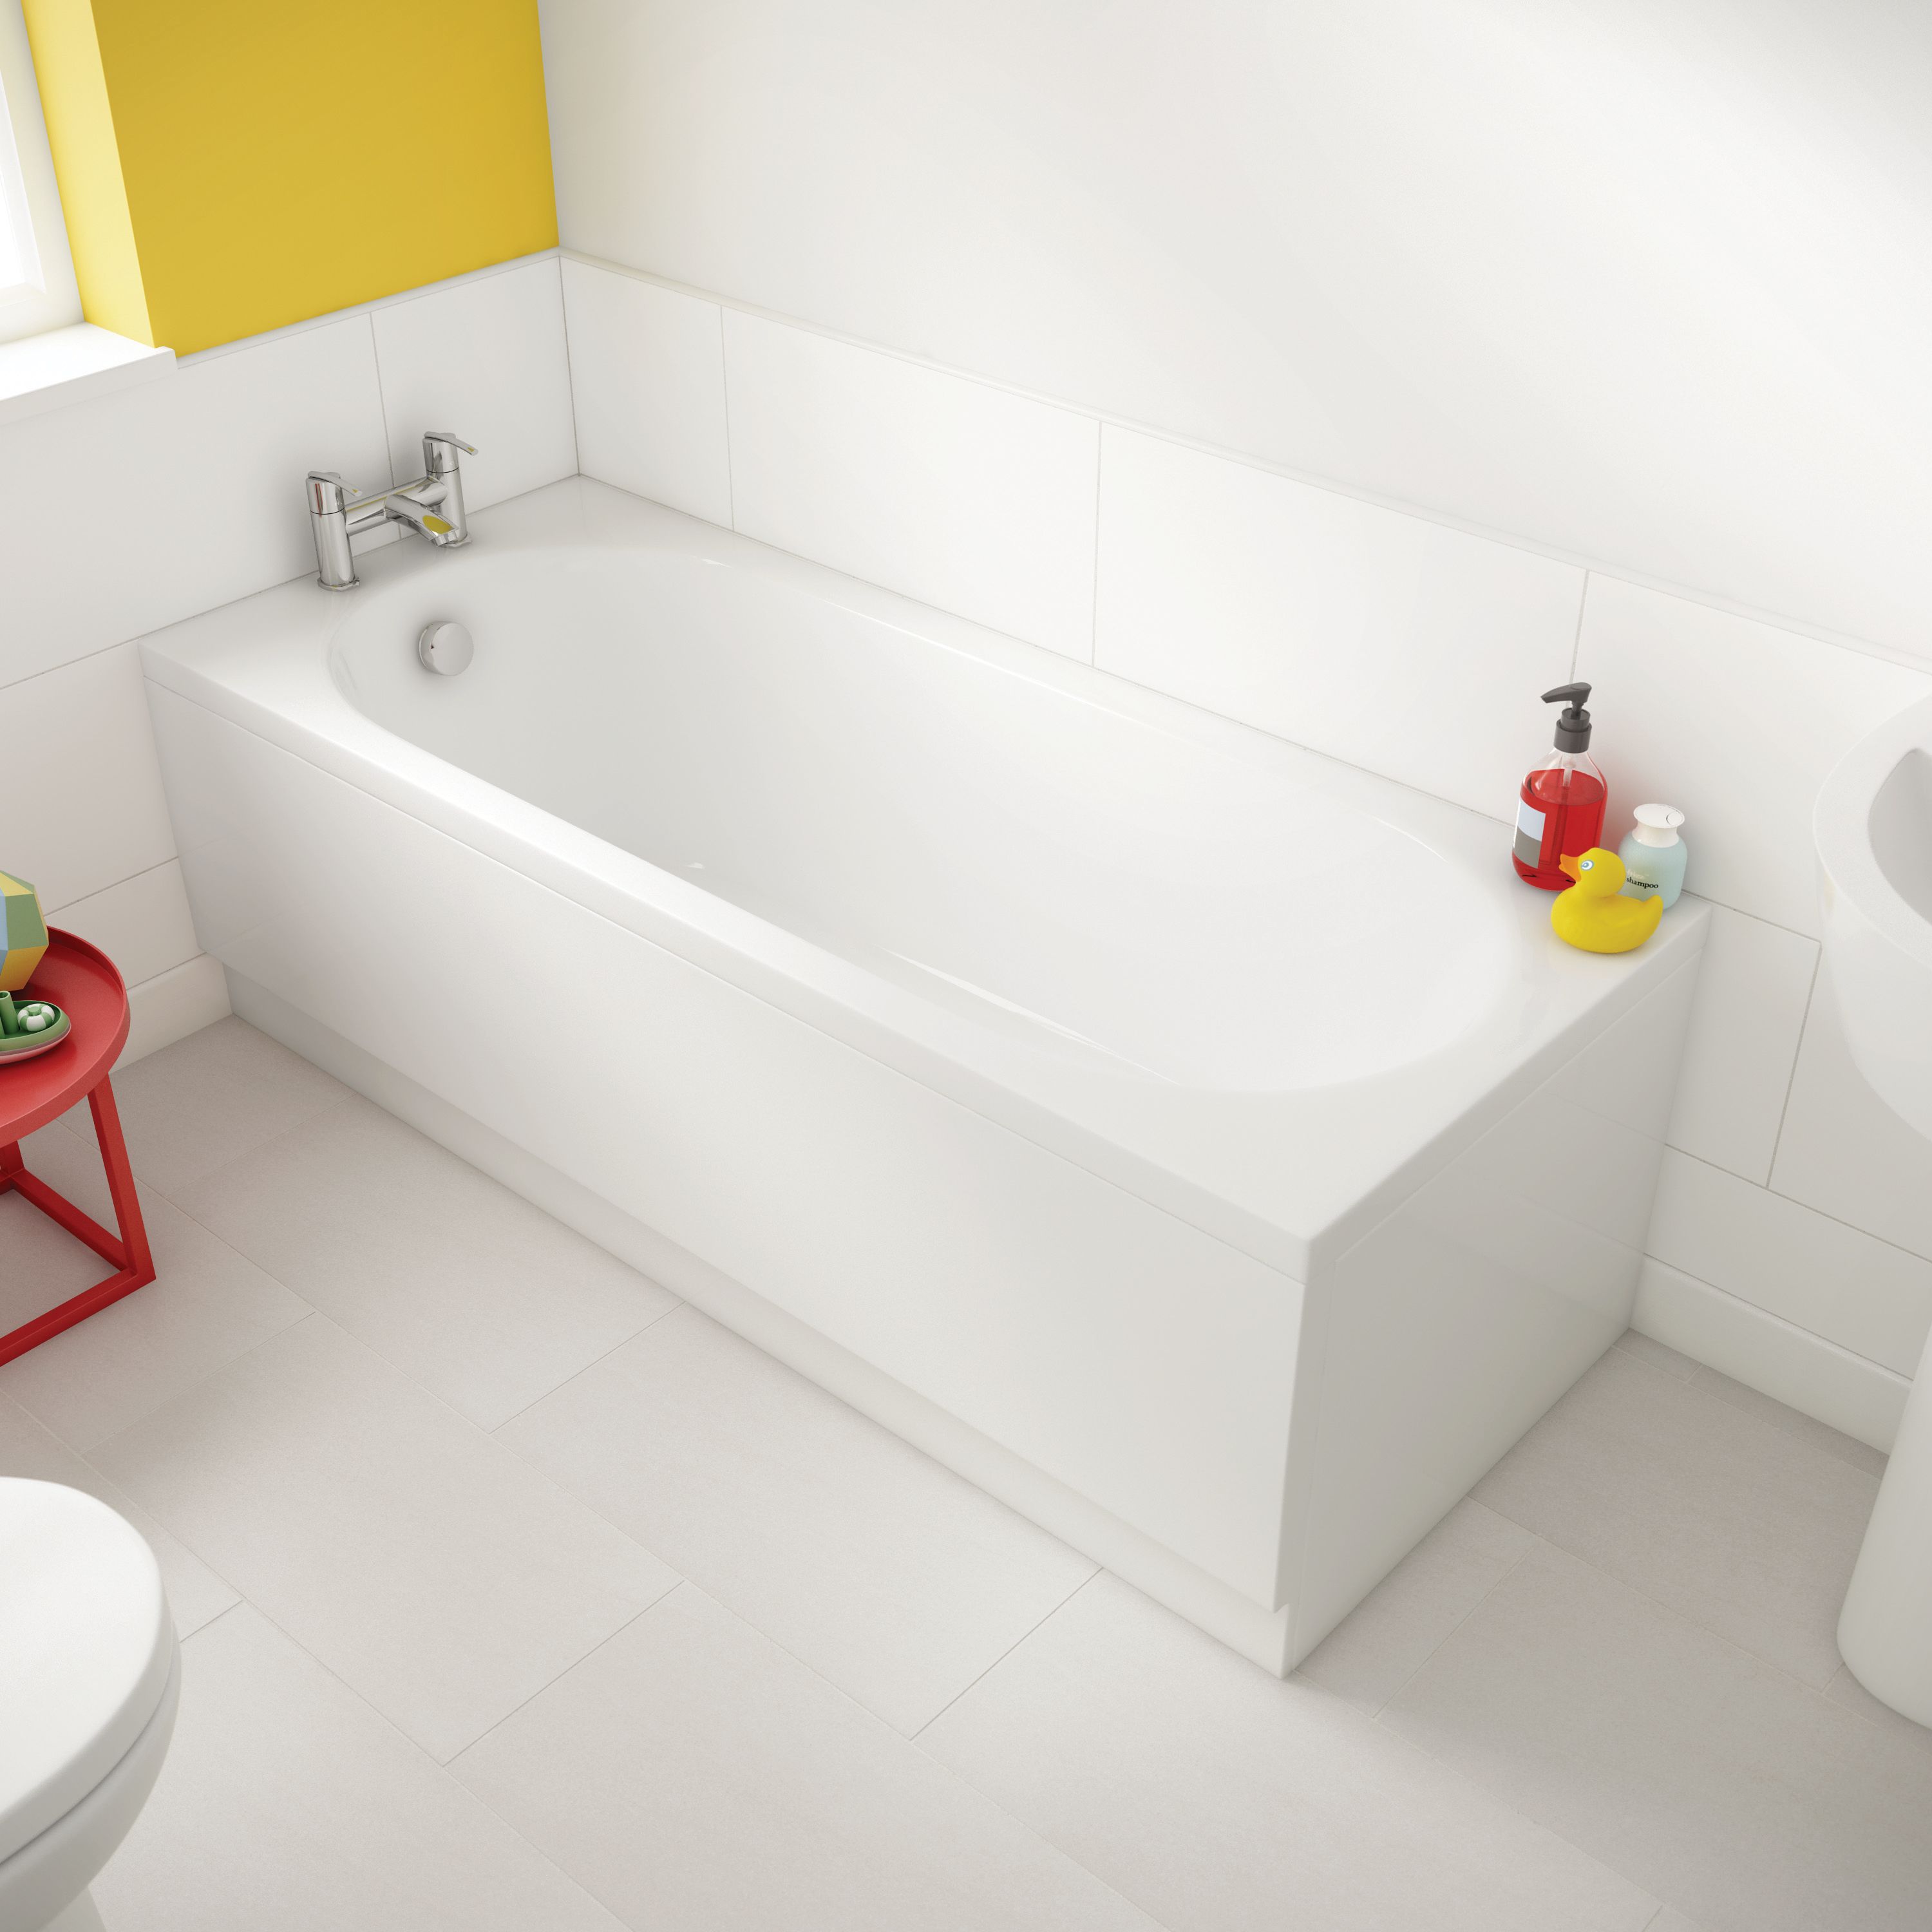 Image of Wickes Forenza Straight Bath - 1600 x 700mm